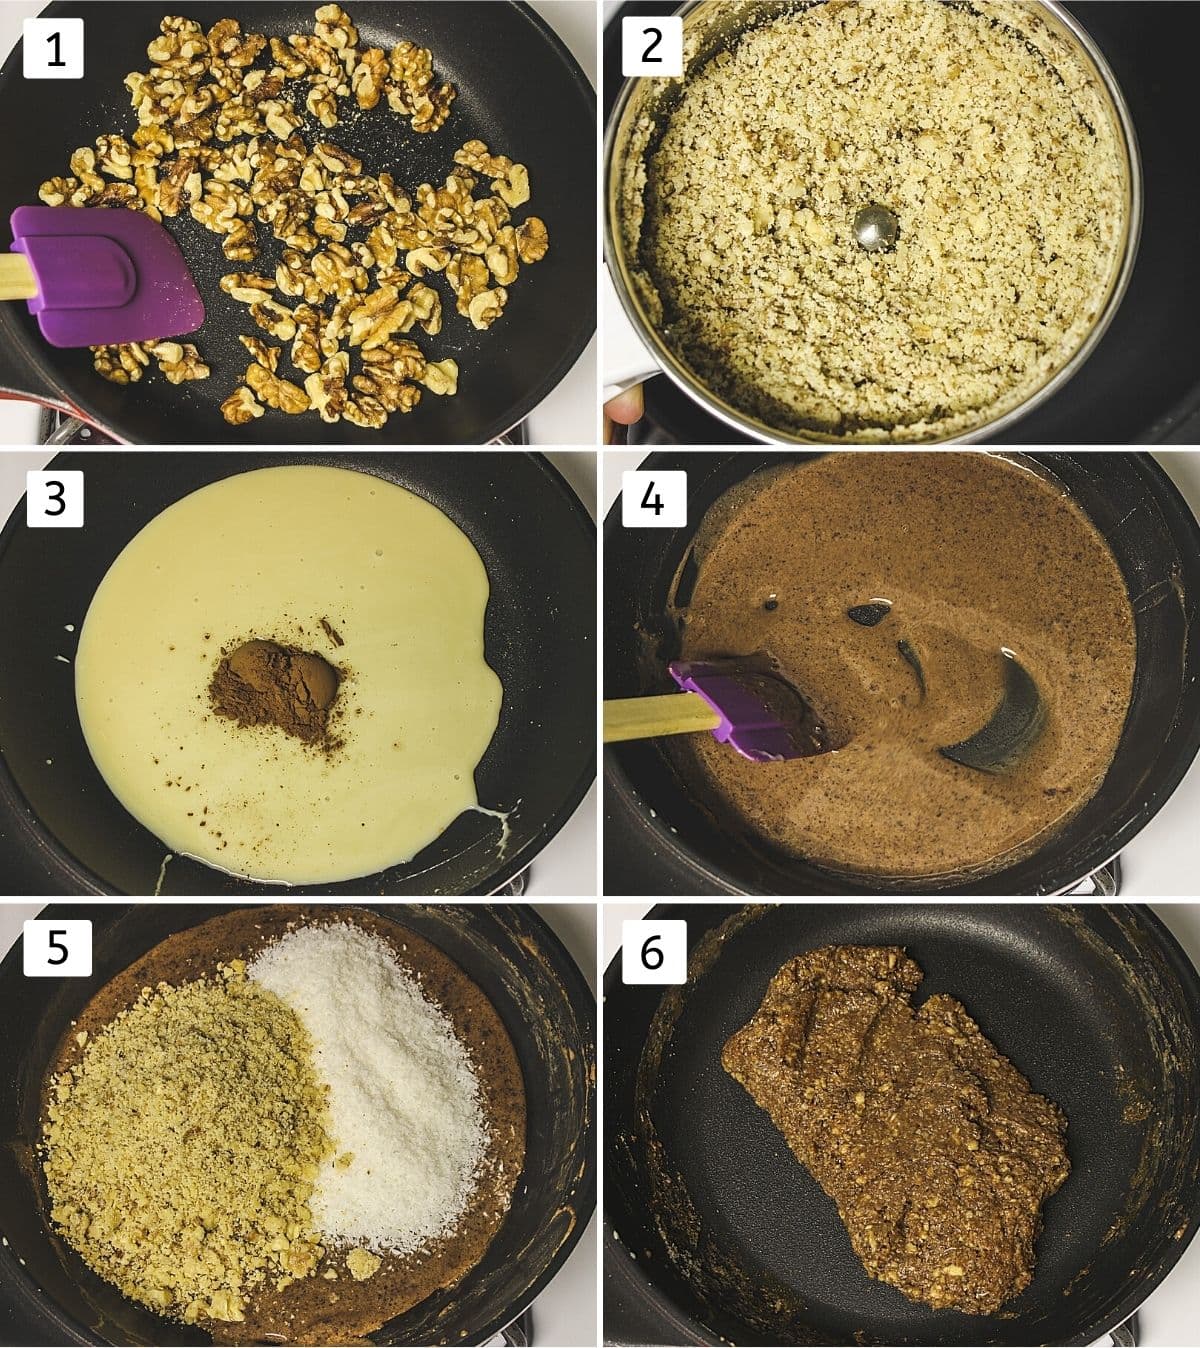 collage of 6 steps showing roasting walnuts, coarsely ground, condensed milk and cocoa powder in a pan, mixed, walnut, coconut added, cooked.